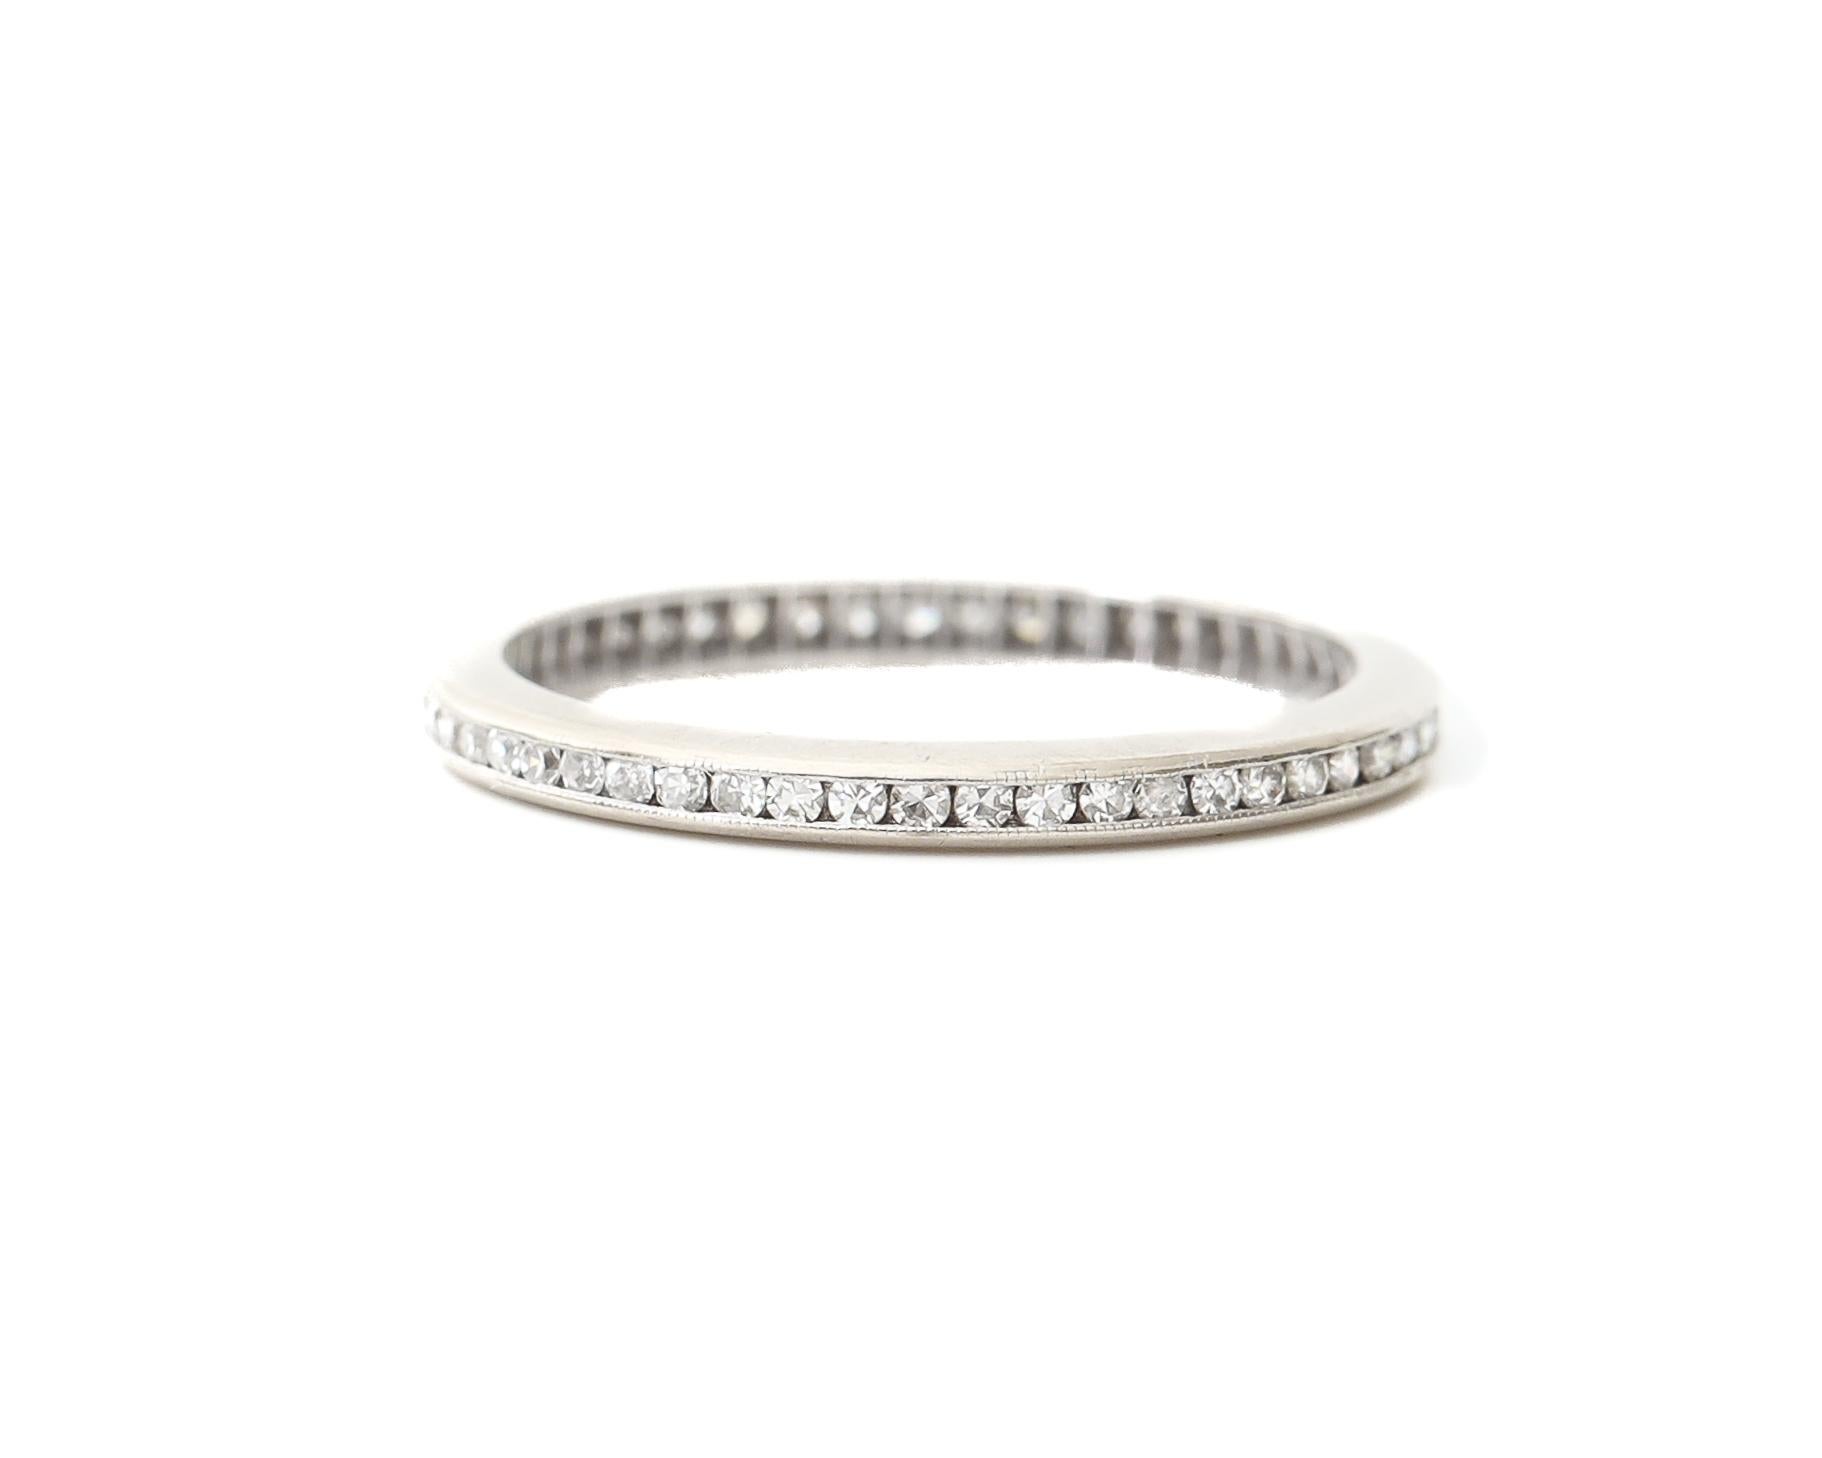 Description: 
Here we have a sparkling 1950s  diamond eternity wedding band! The diamonds are 0.70 cttw of antique single cuts. There is a pierced open back pattern throughout the ring to allow light and brilliance to be at a maximum for each stone